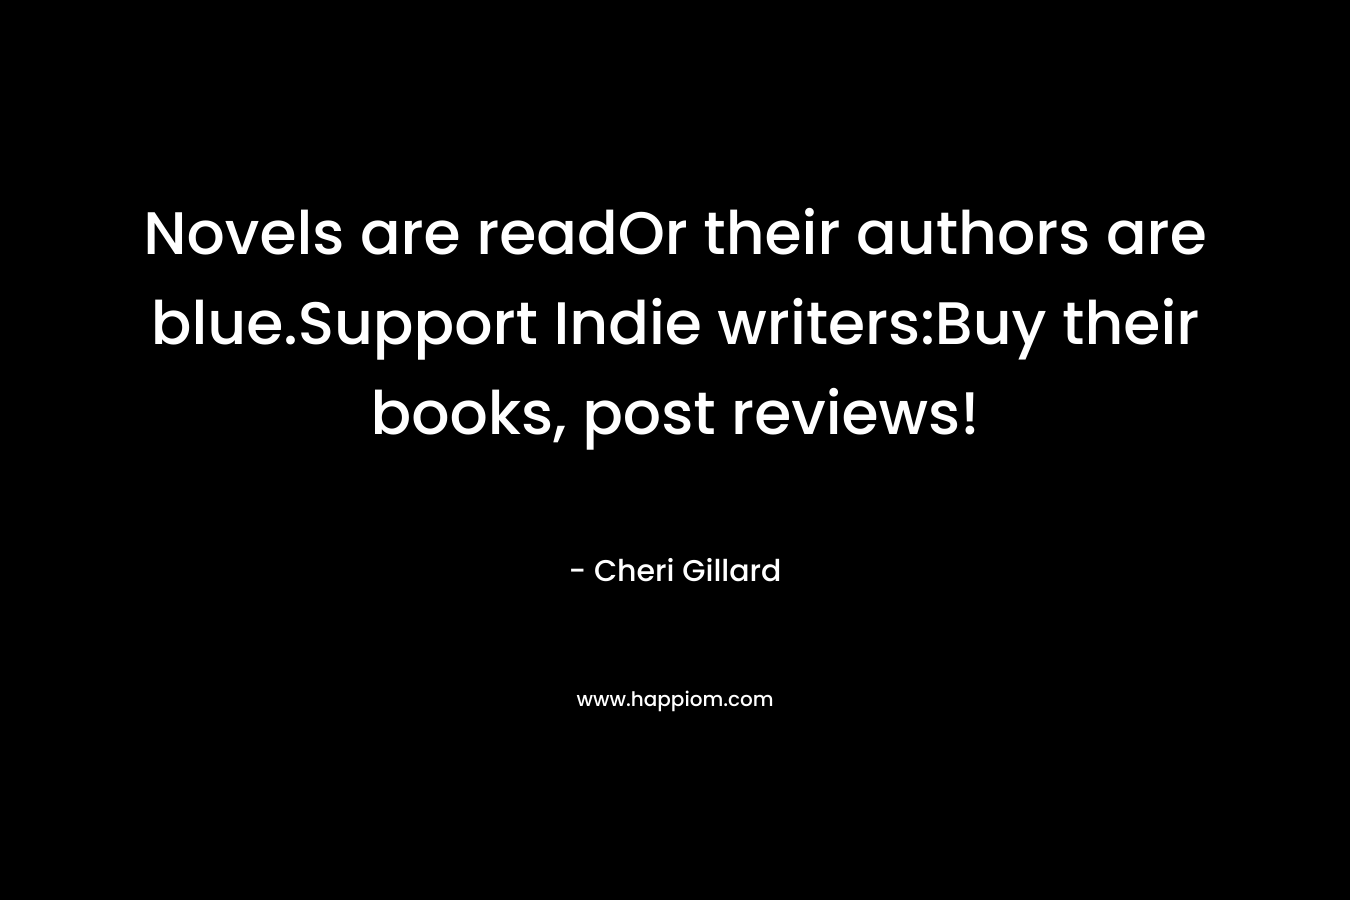 Novels are readOr their authors are blue.Support Indie writers:Buy their books, post reviews! – Cheri Gillard